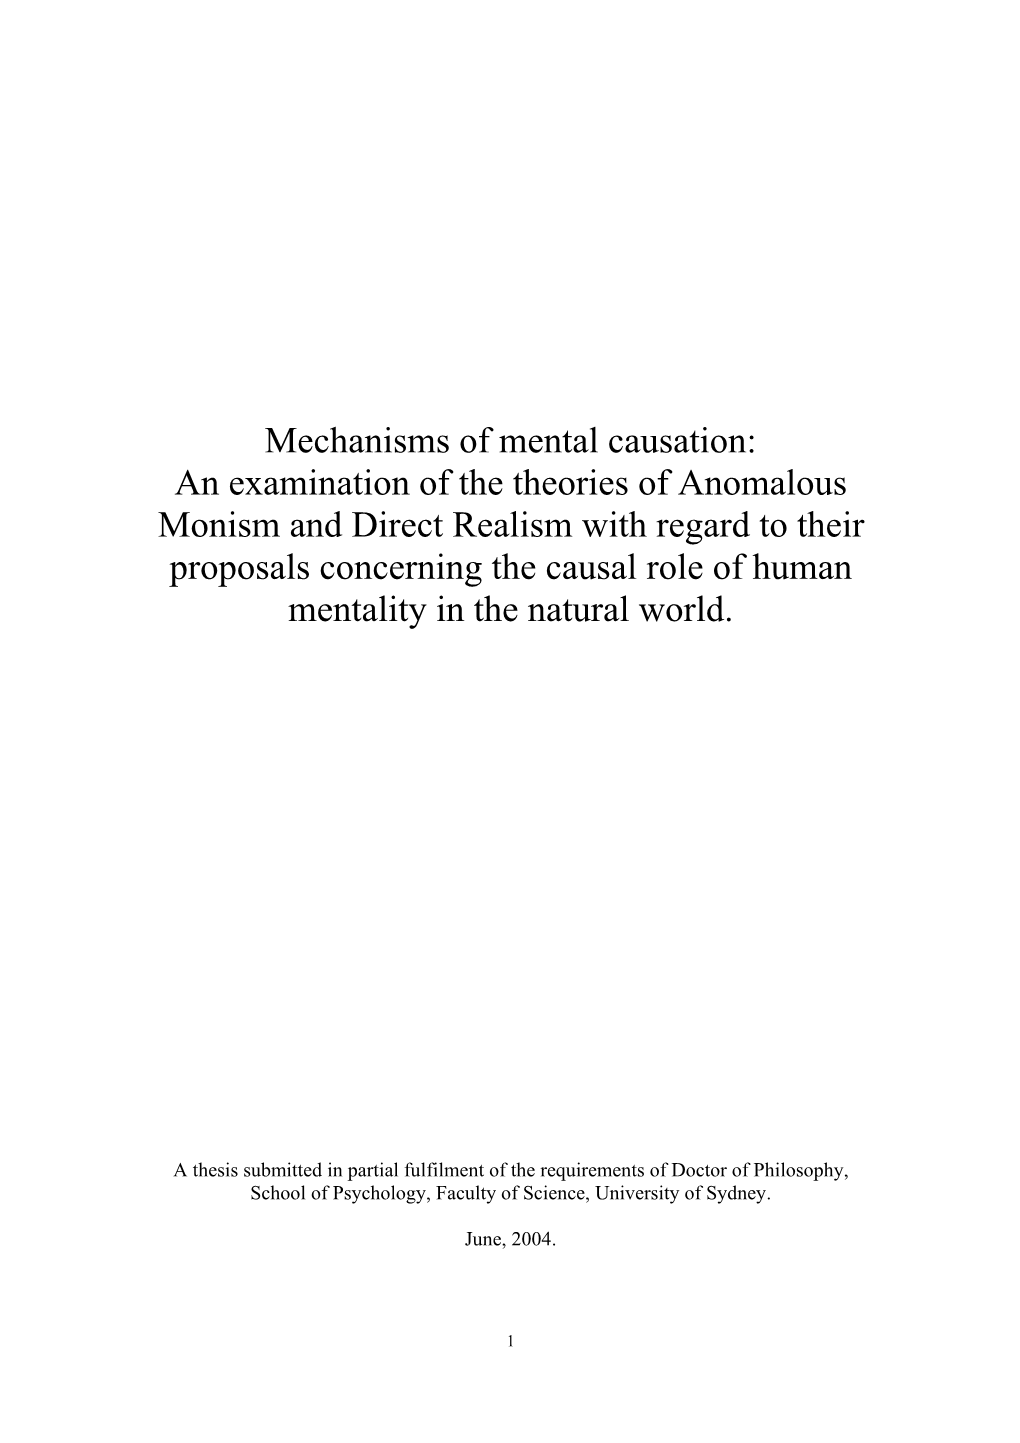 Mechanisms of Mental Causation: an Examination of the Theories of Anomalous Monism and Direct Realism with Regard to Their Propo